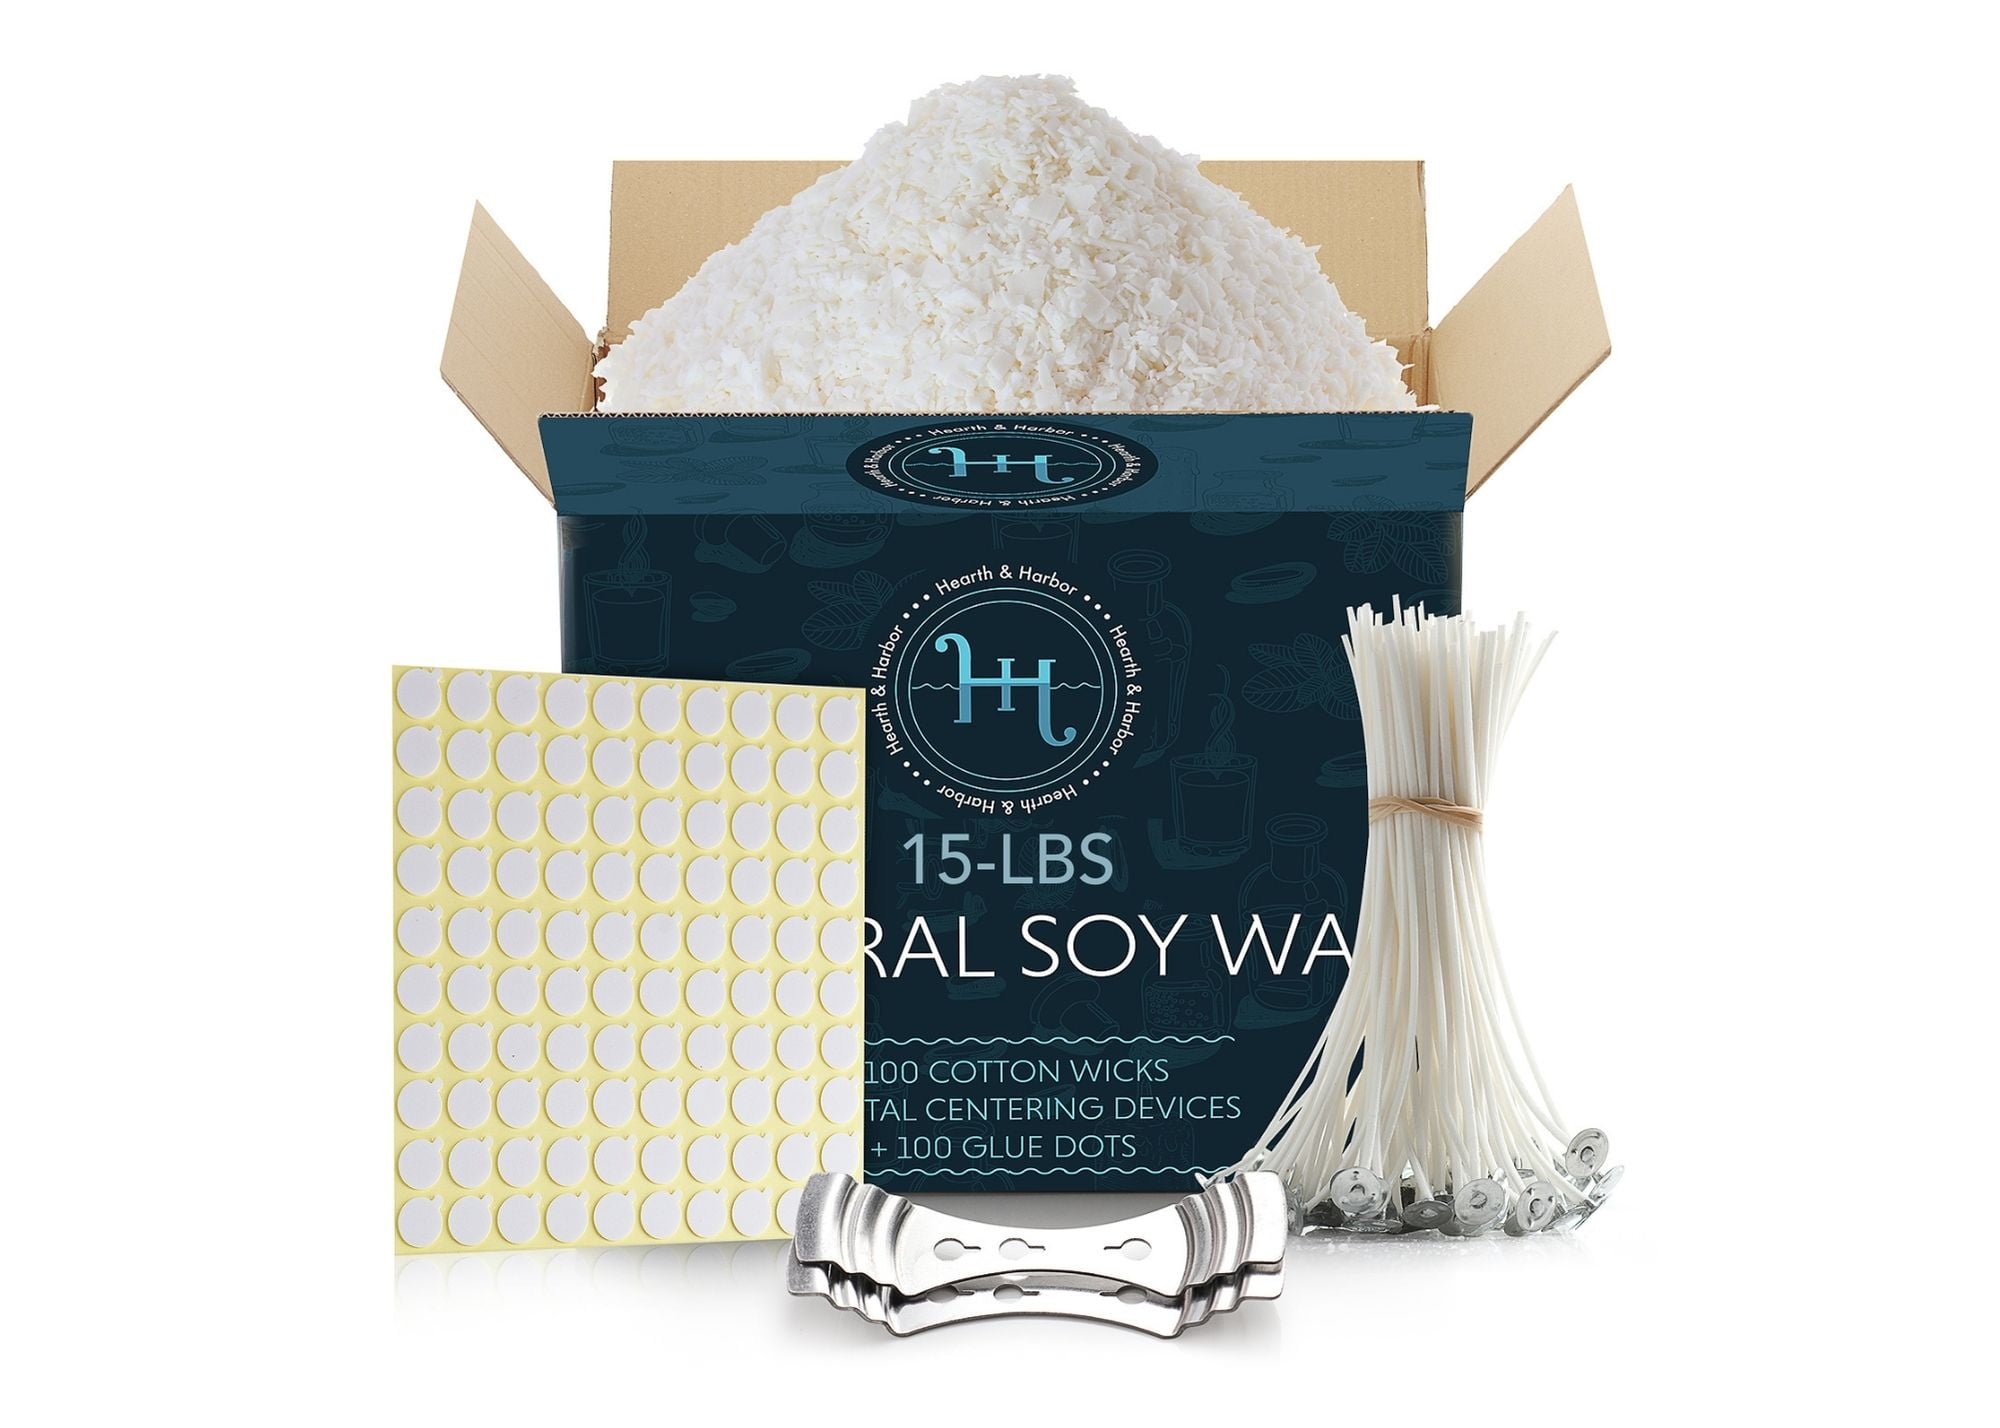 SOY WAX PREMIUM CANDLE MAKING KIT (CASE OF 12 UNITS)– Hearts & Crafts